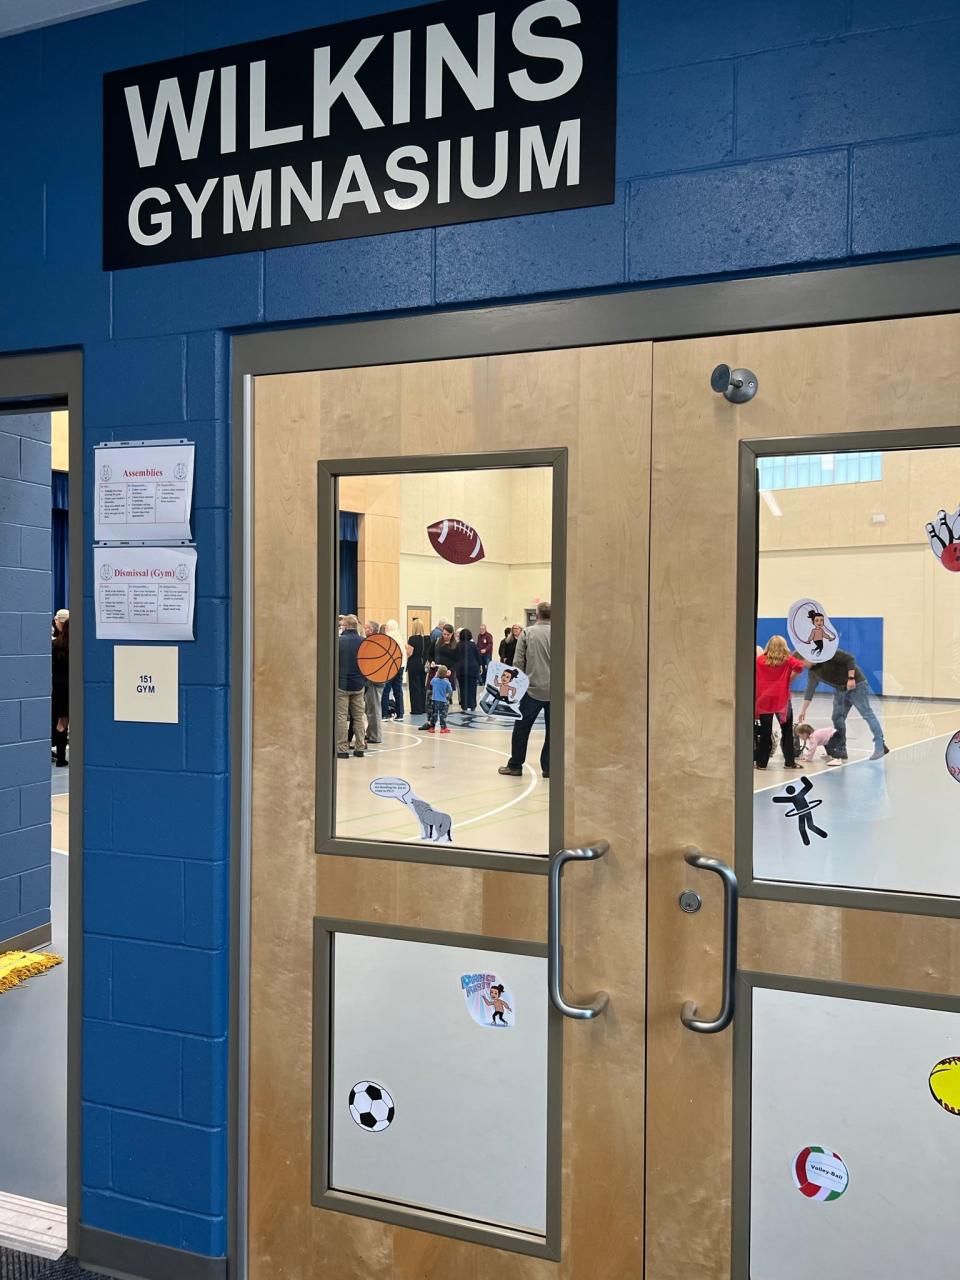 The Margaret Chase Smith Elementary School gymnasium was officially dedicated Saturday to the late physical education teacher Richard Wilkins.